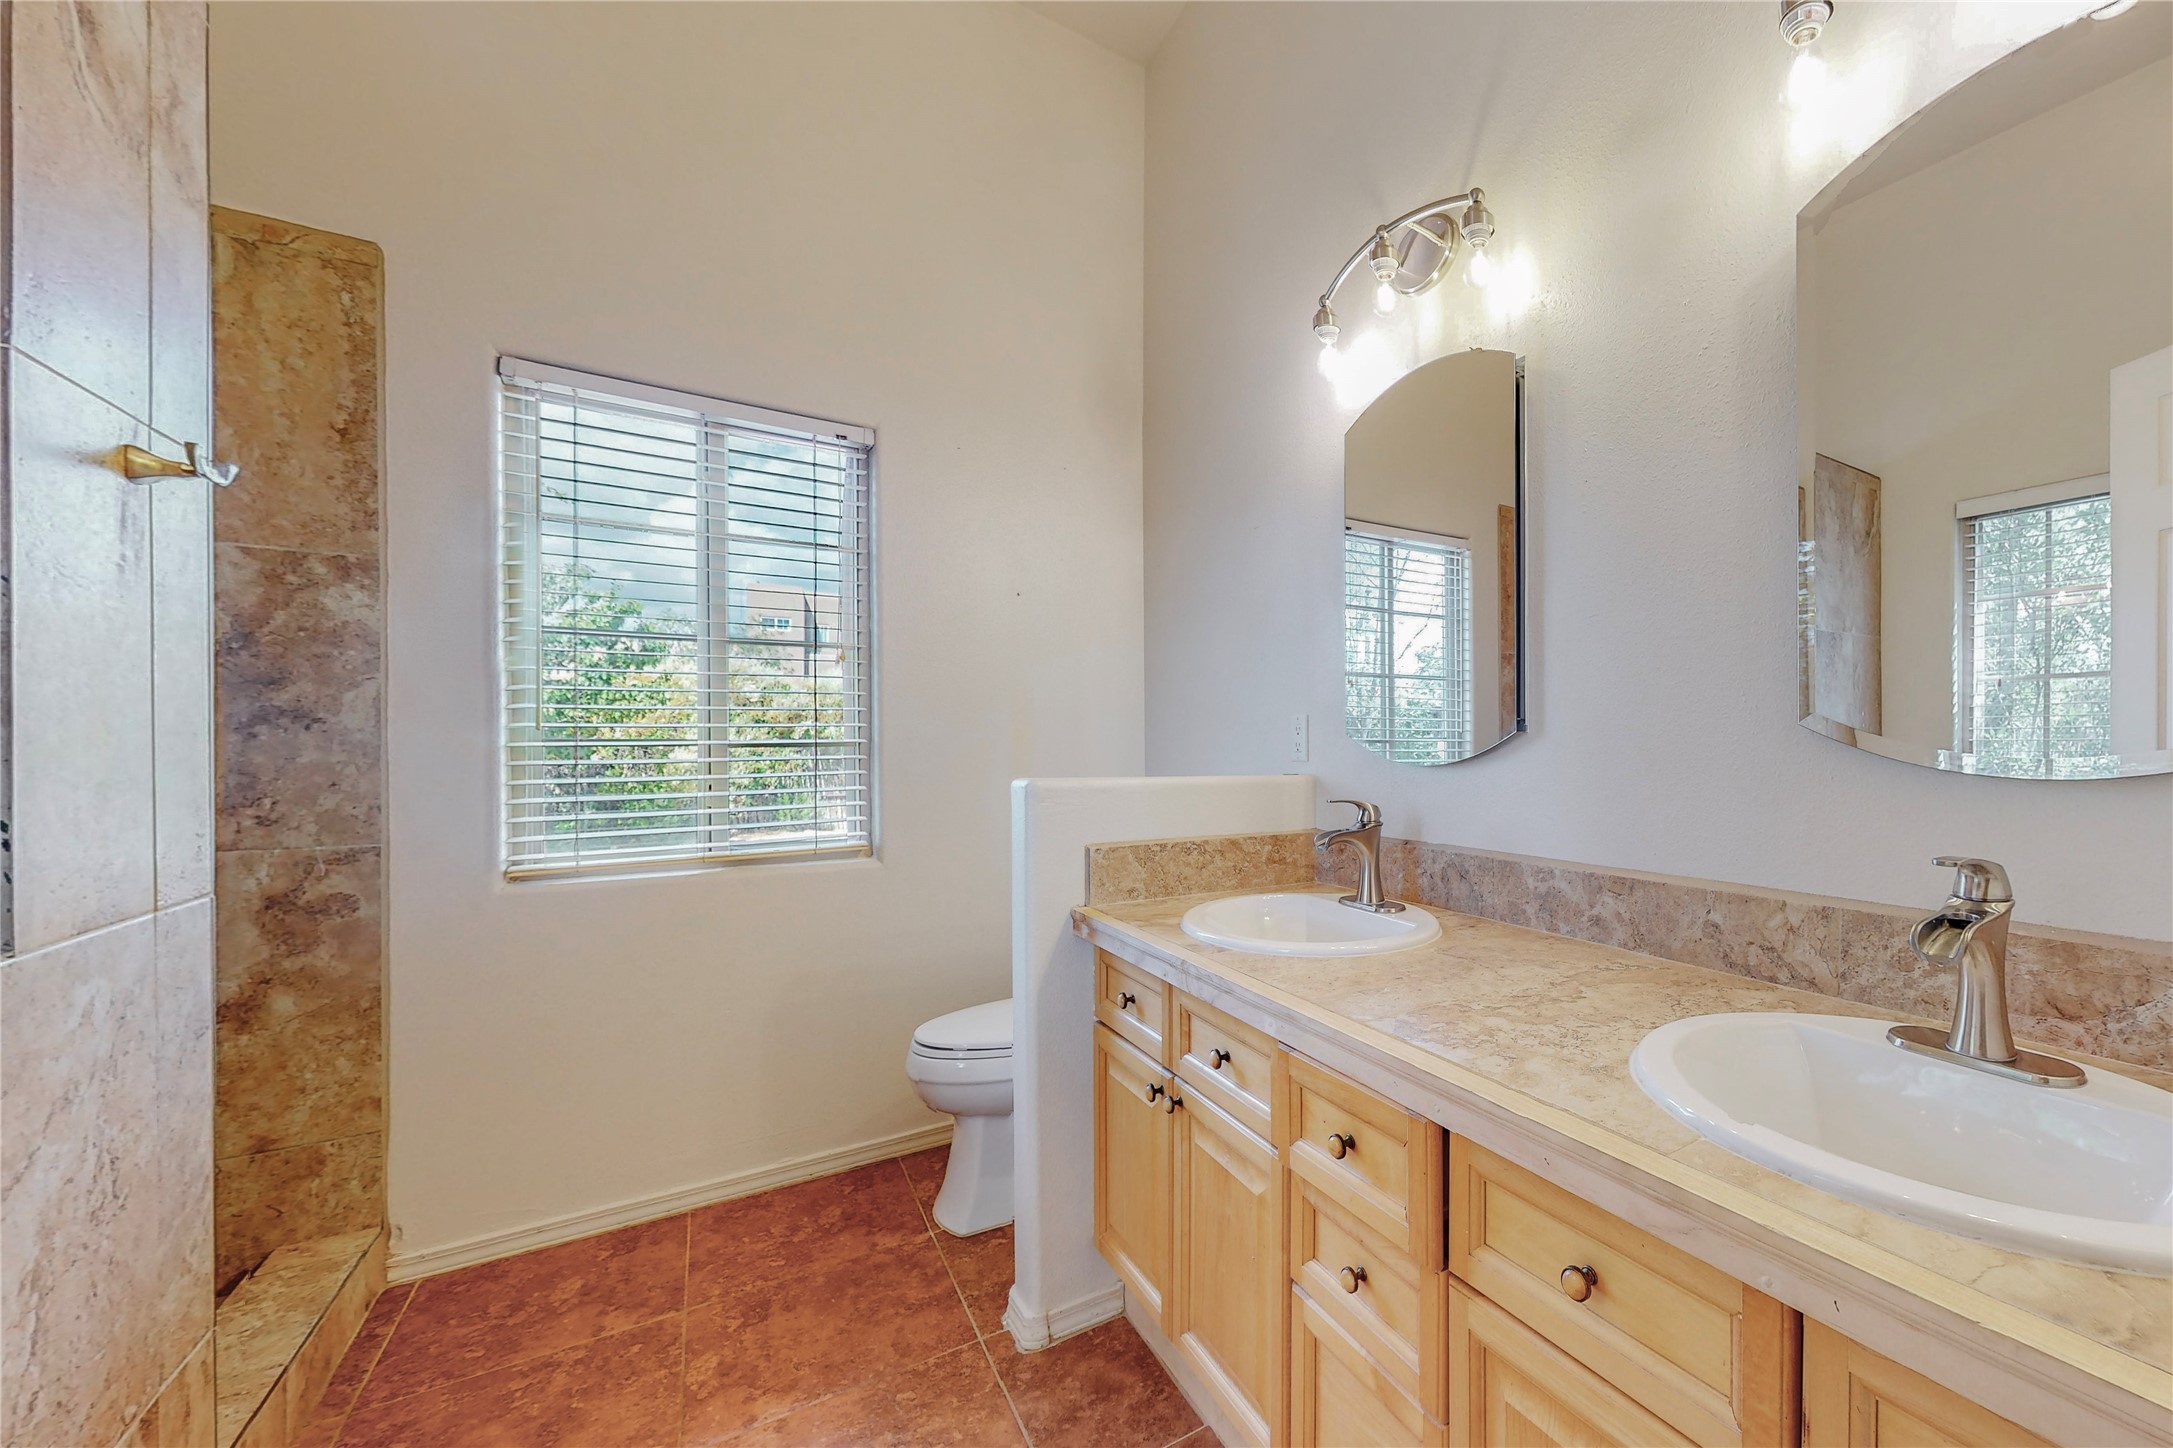 4259 Indian Summer Lane, Santa Fe, New Mexico 87507, 4 Bedrooms Bedrooms, ,3 BathroomsBathrooms,Residential,For Sale,4259 Indian Summer Lane,202233007